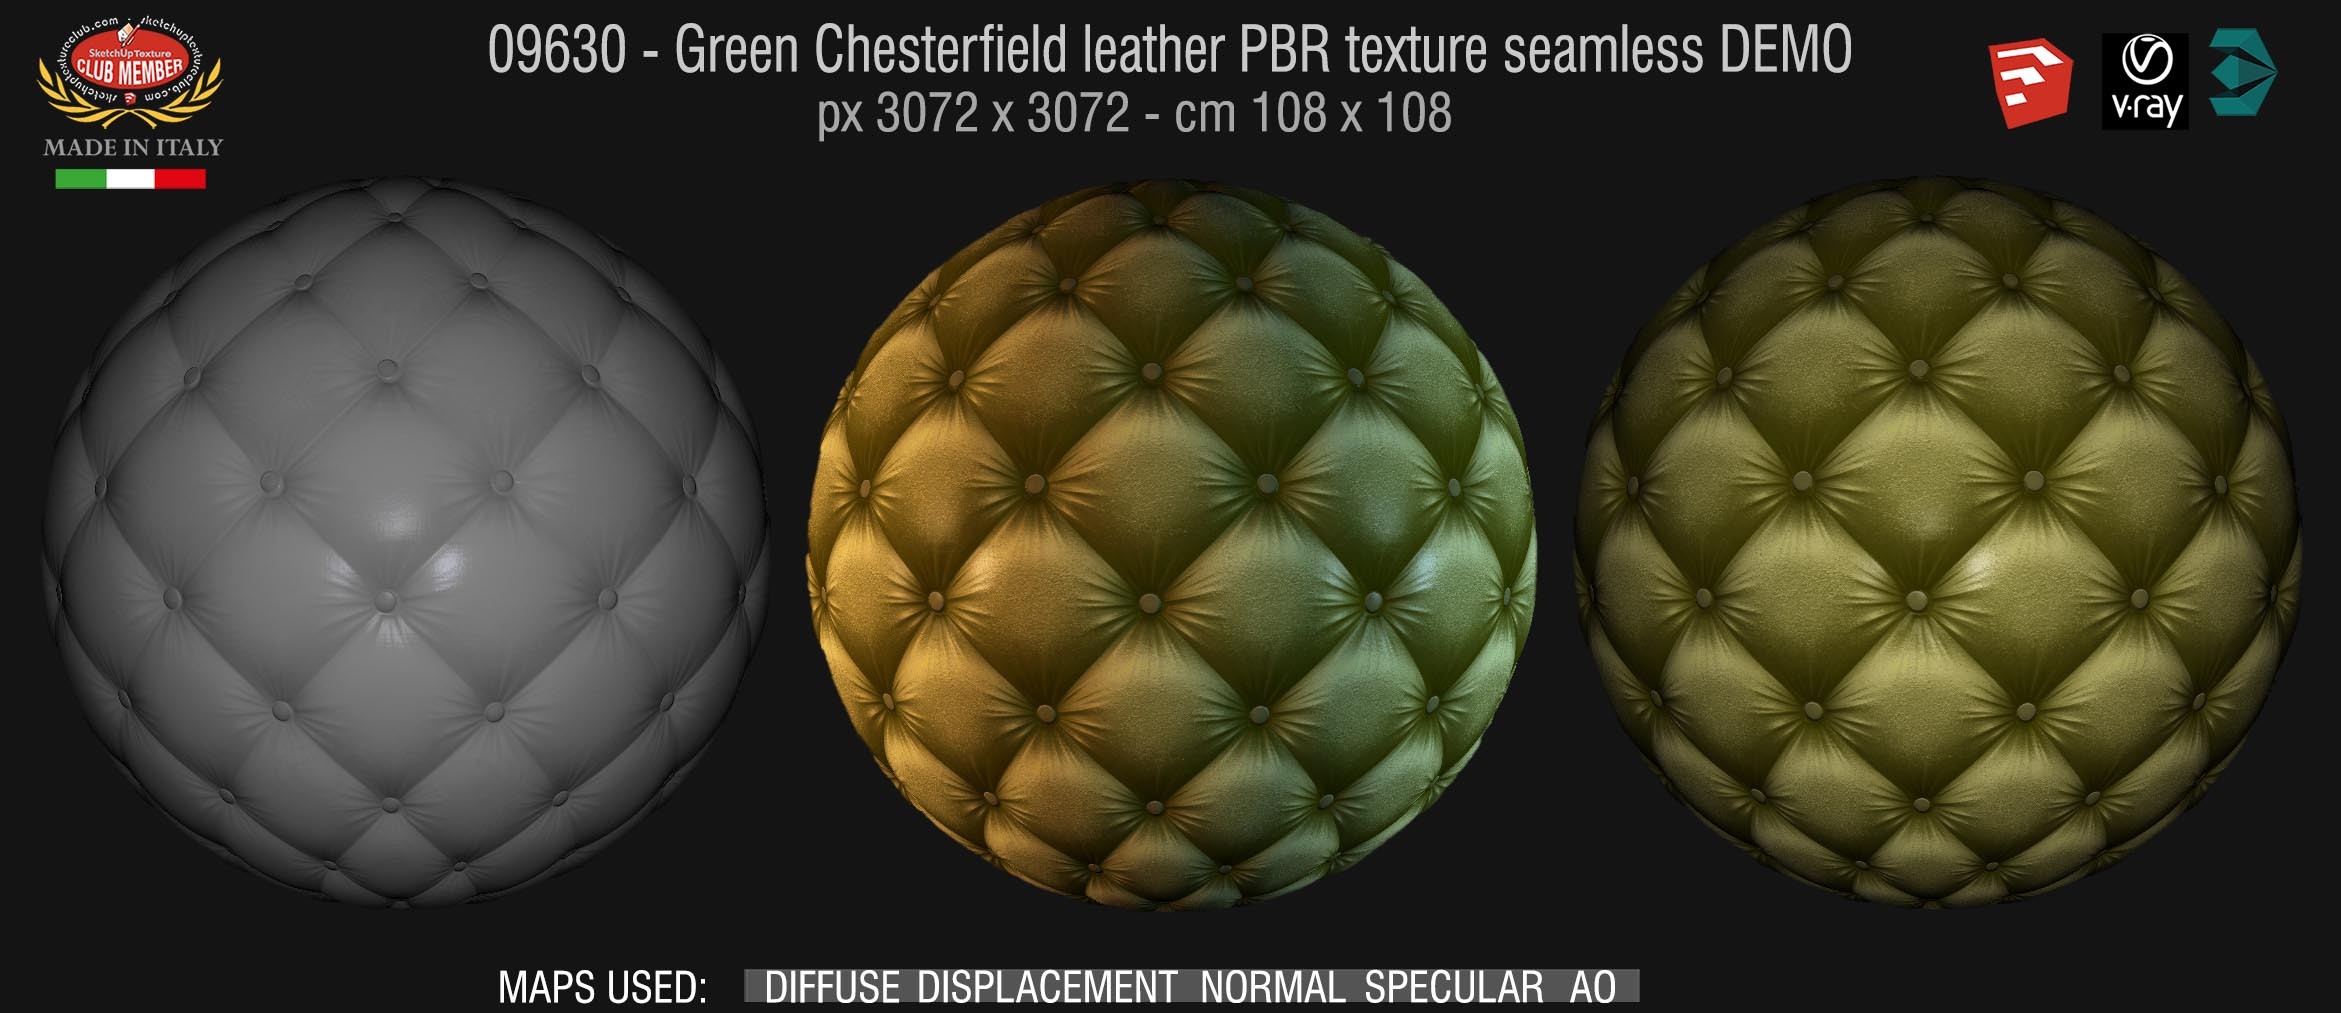 09630 Green Chesterfield leather PBR texture seamless DEMO